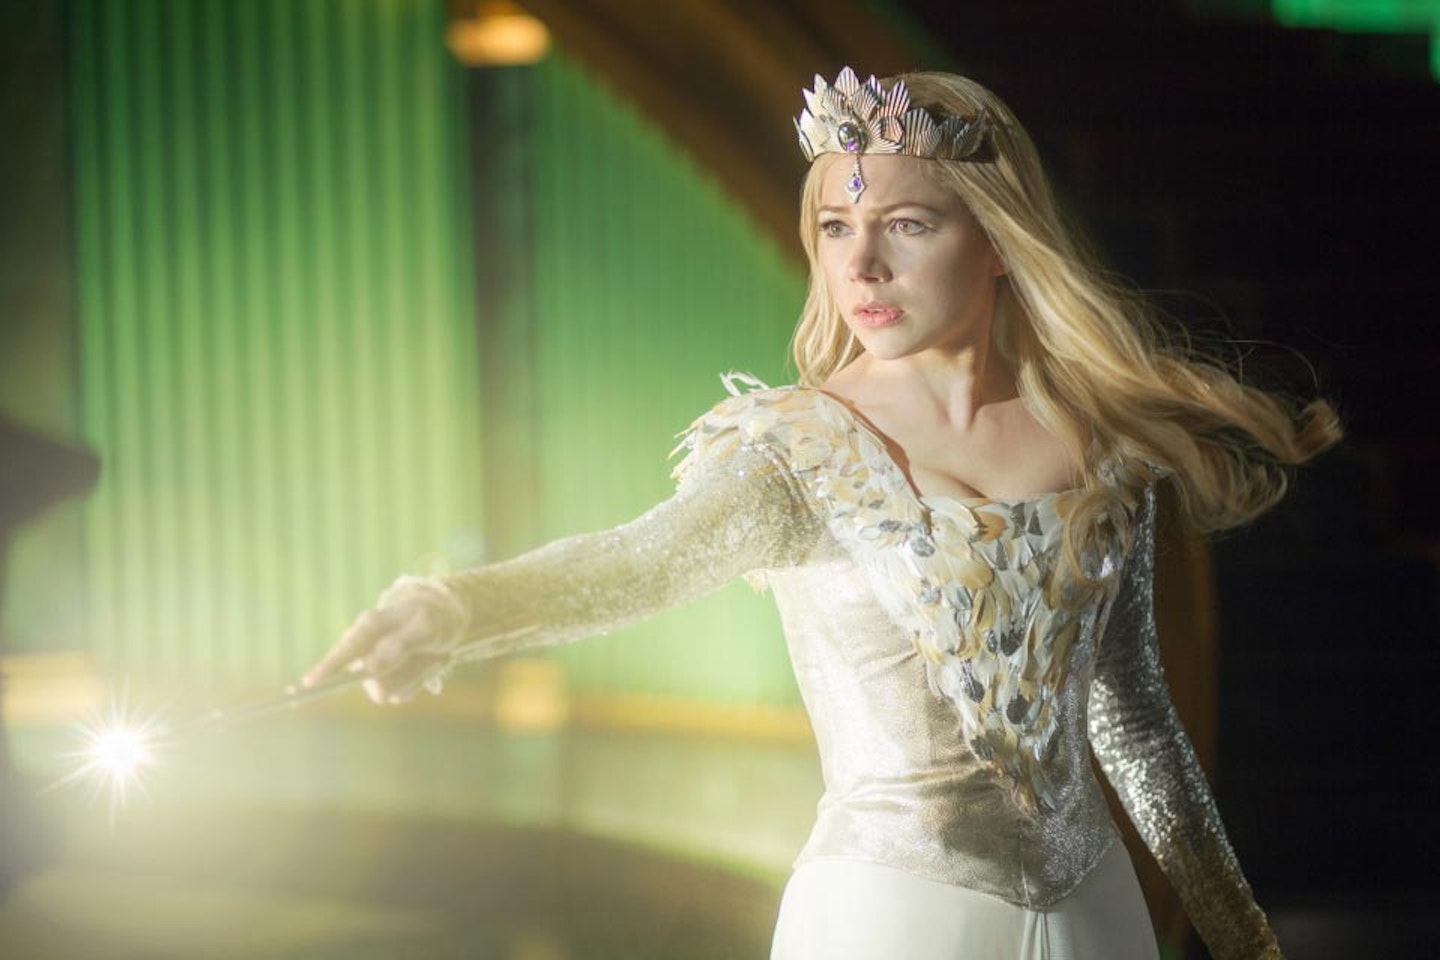 Final Oz The Great And Powerful Trailer